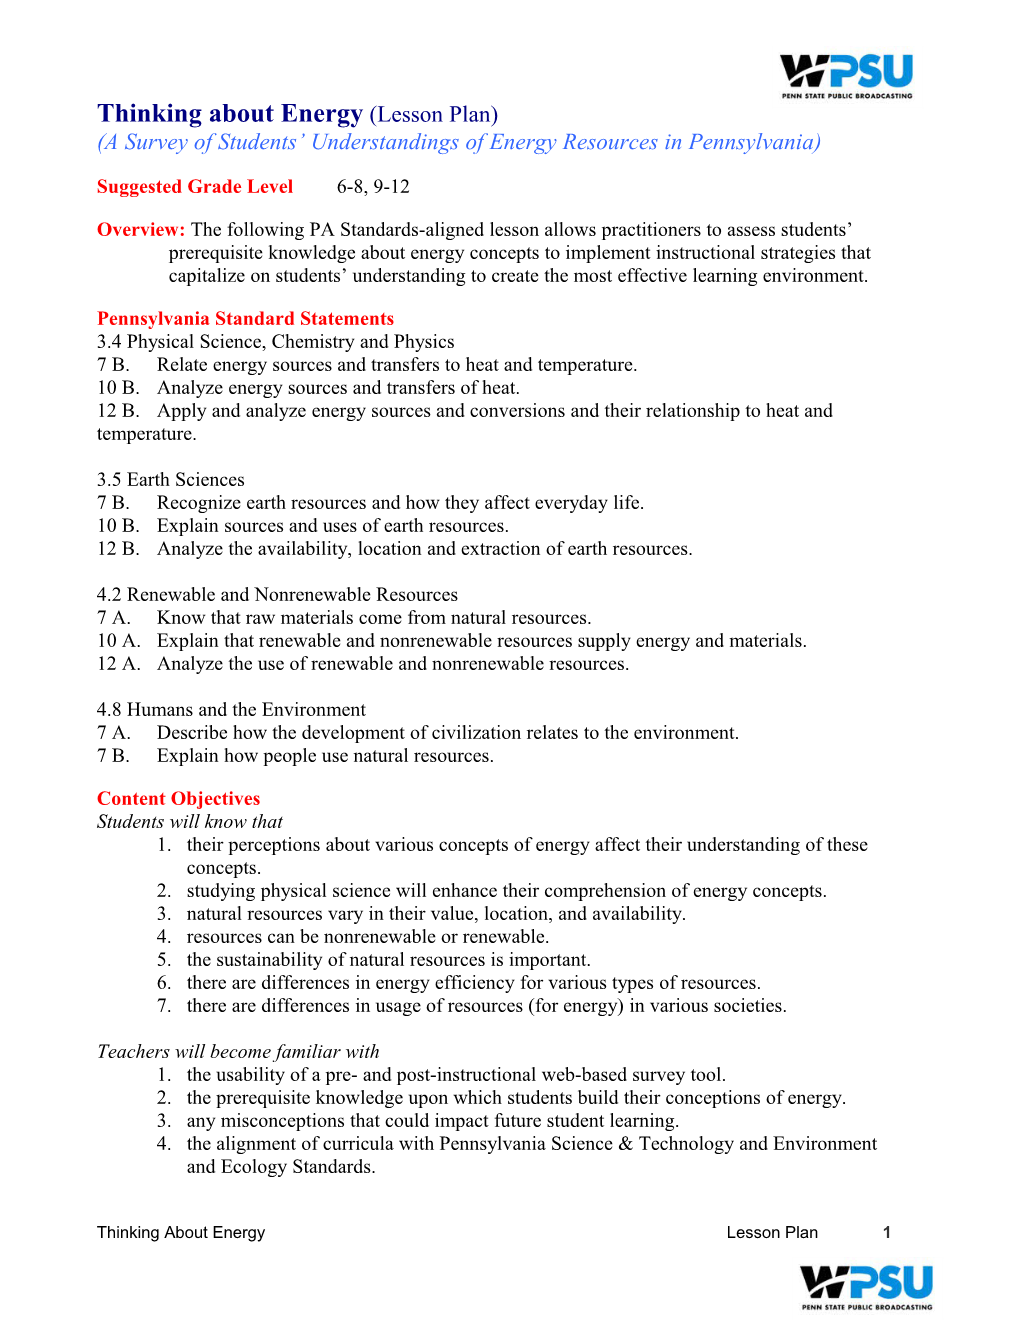 Thinking About Energy (Lesson Plan)